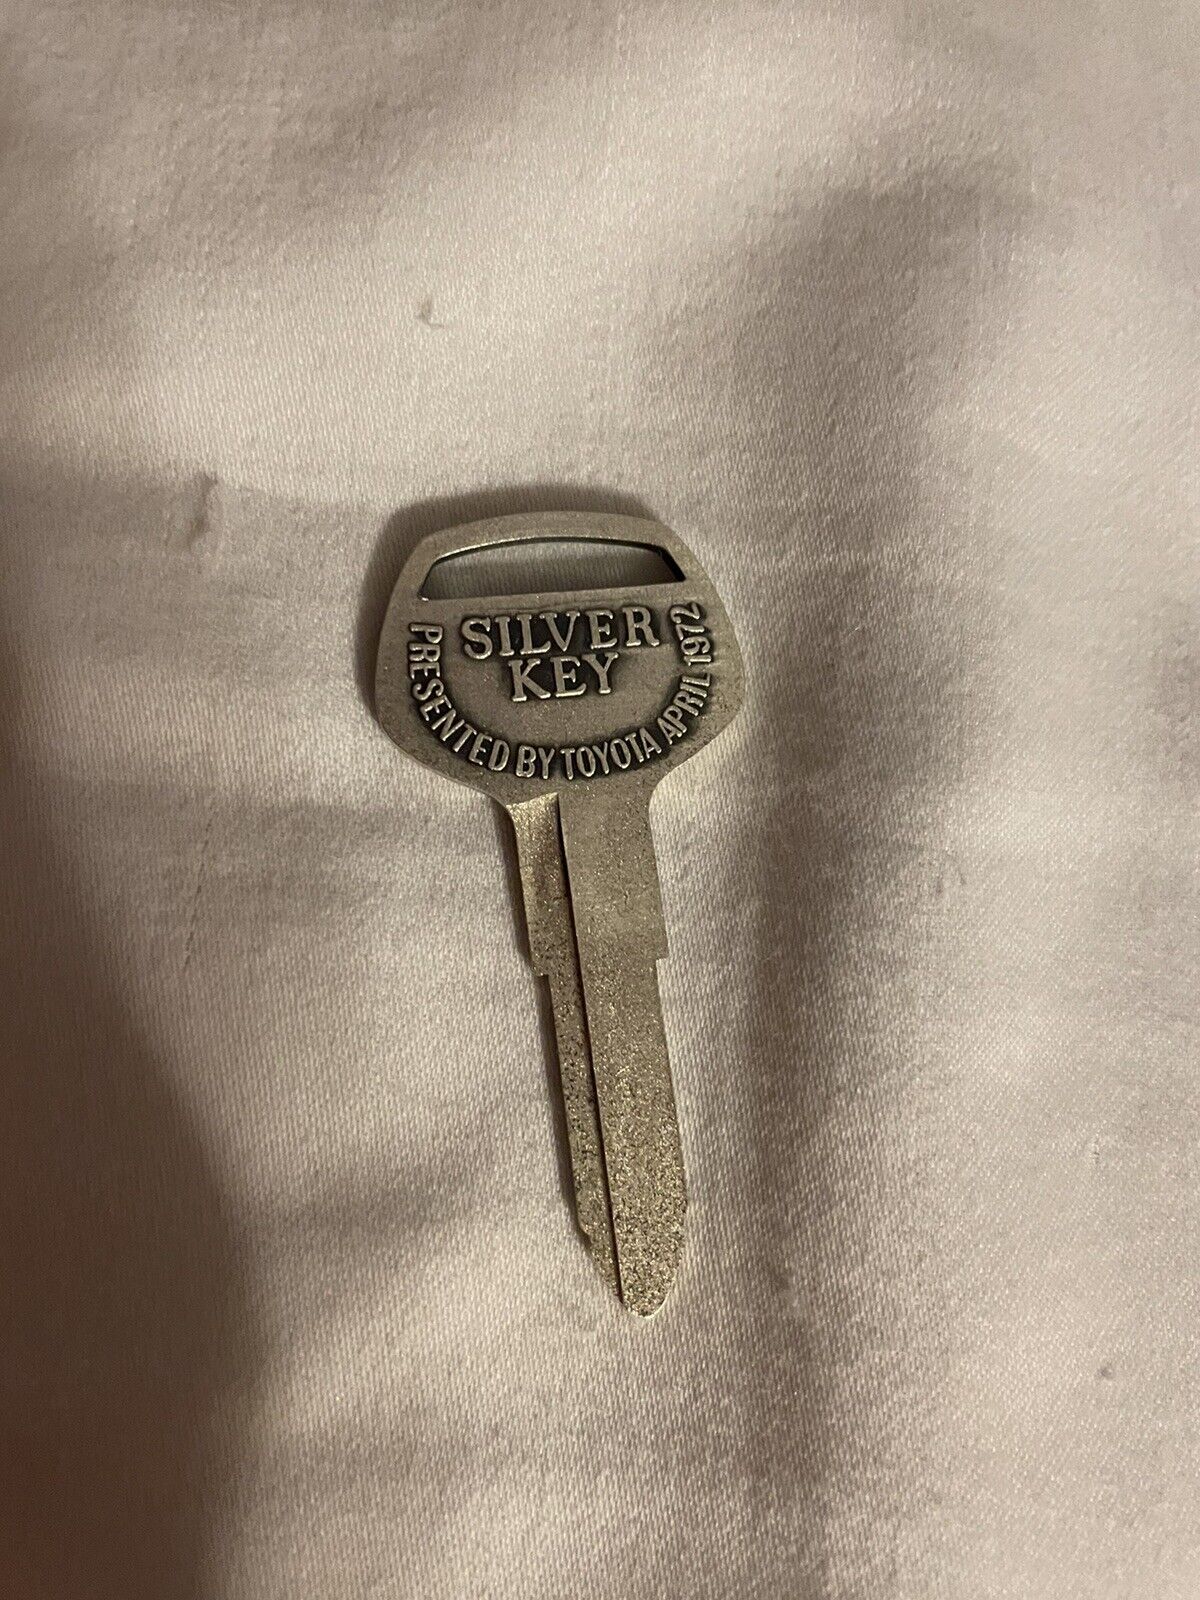 Toyota Solid Silver Key JAPAN ONLY JDM Antique 1972 Anniversary Event